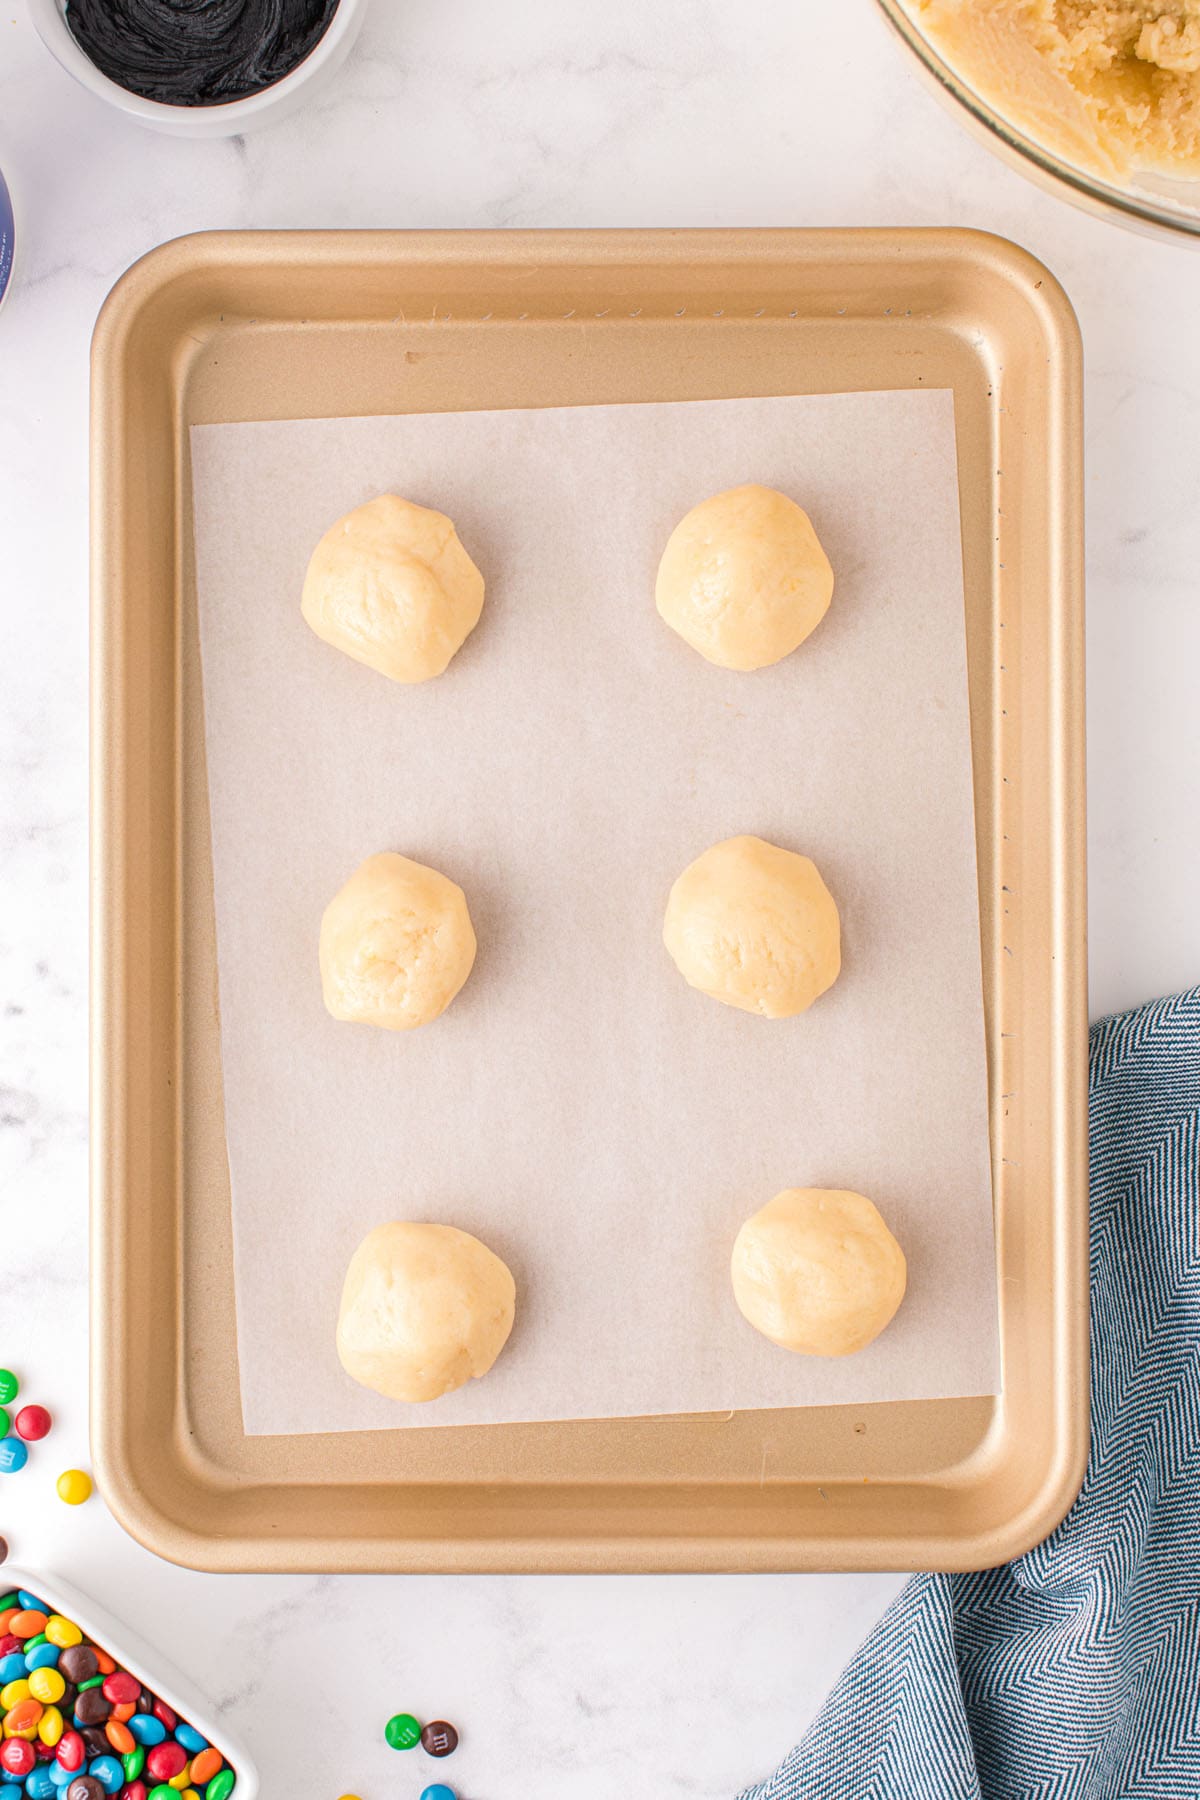 Roll dough into 2-inch balls and place on a lined baking sheet